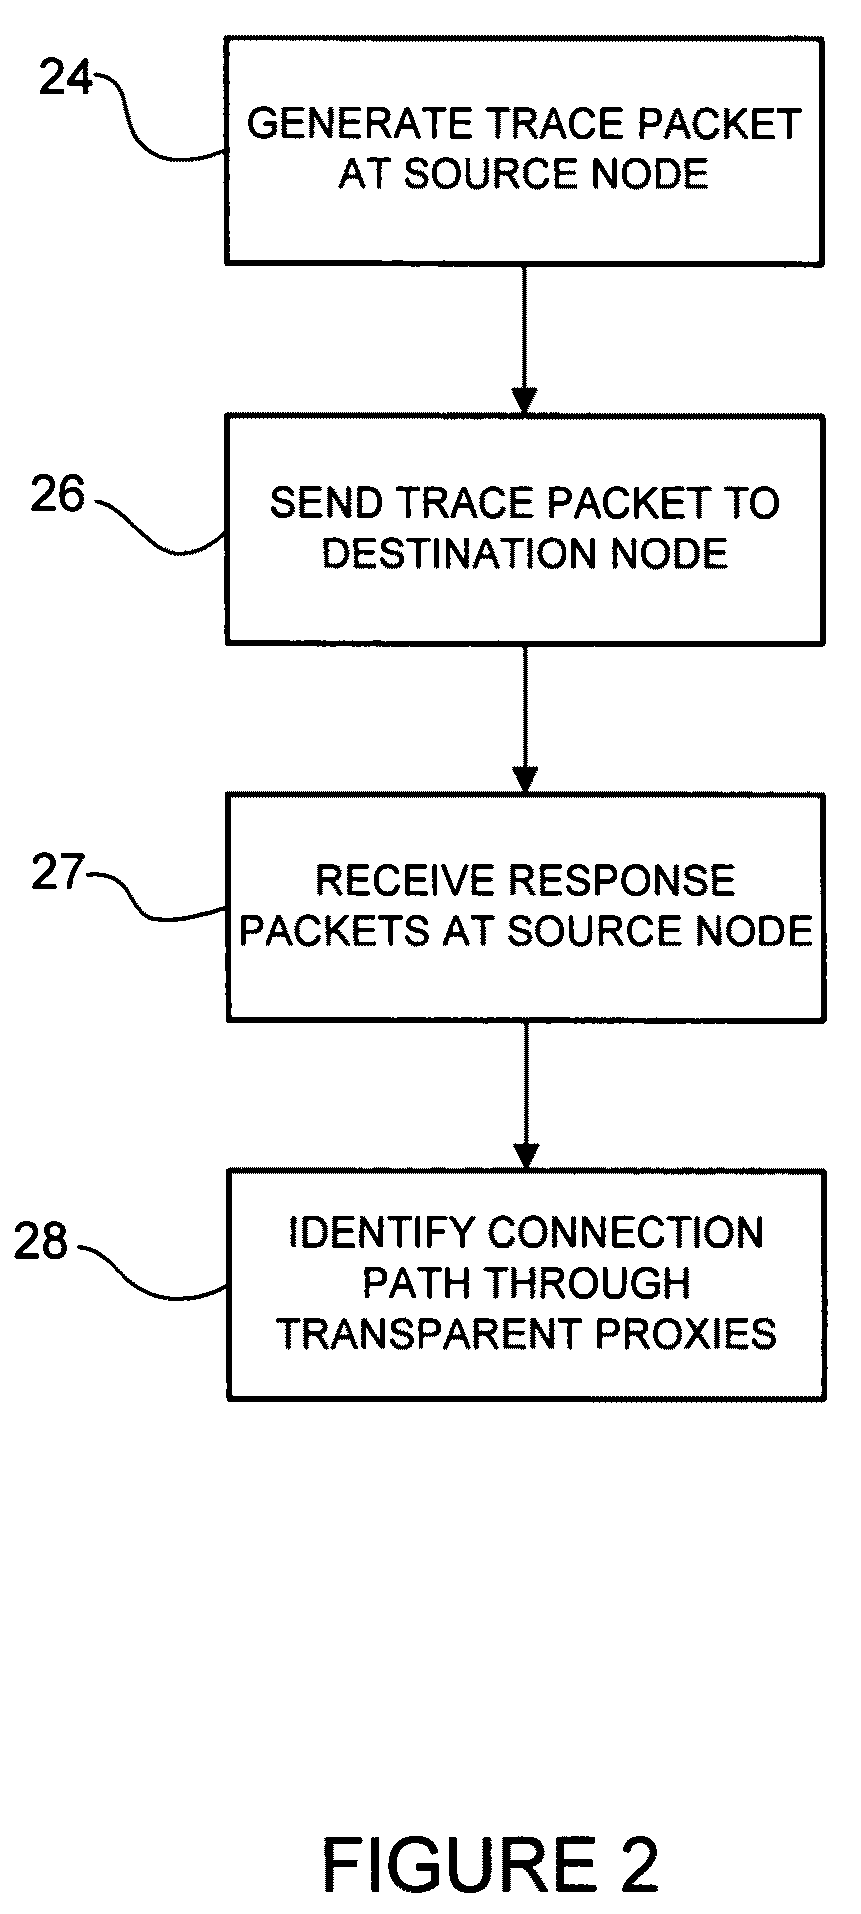 Tracing connection paths through transparent proxies